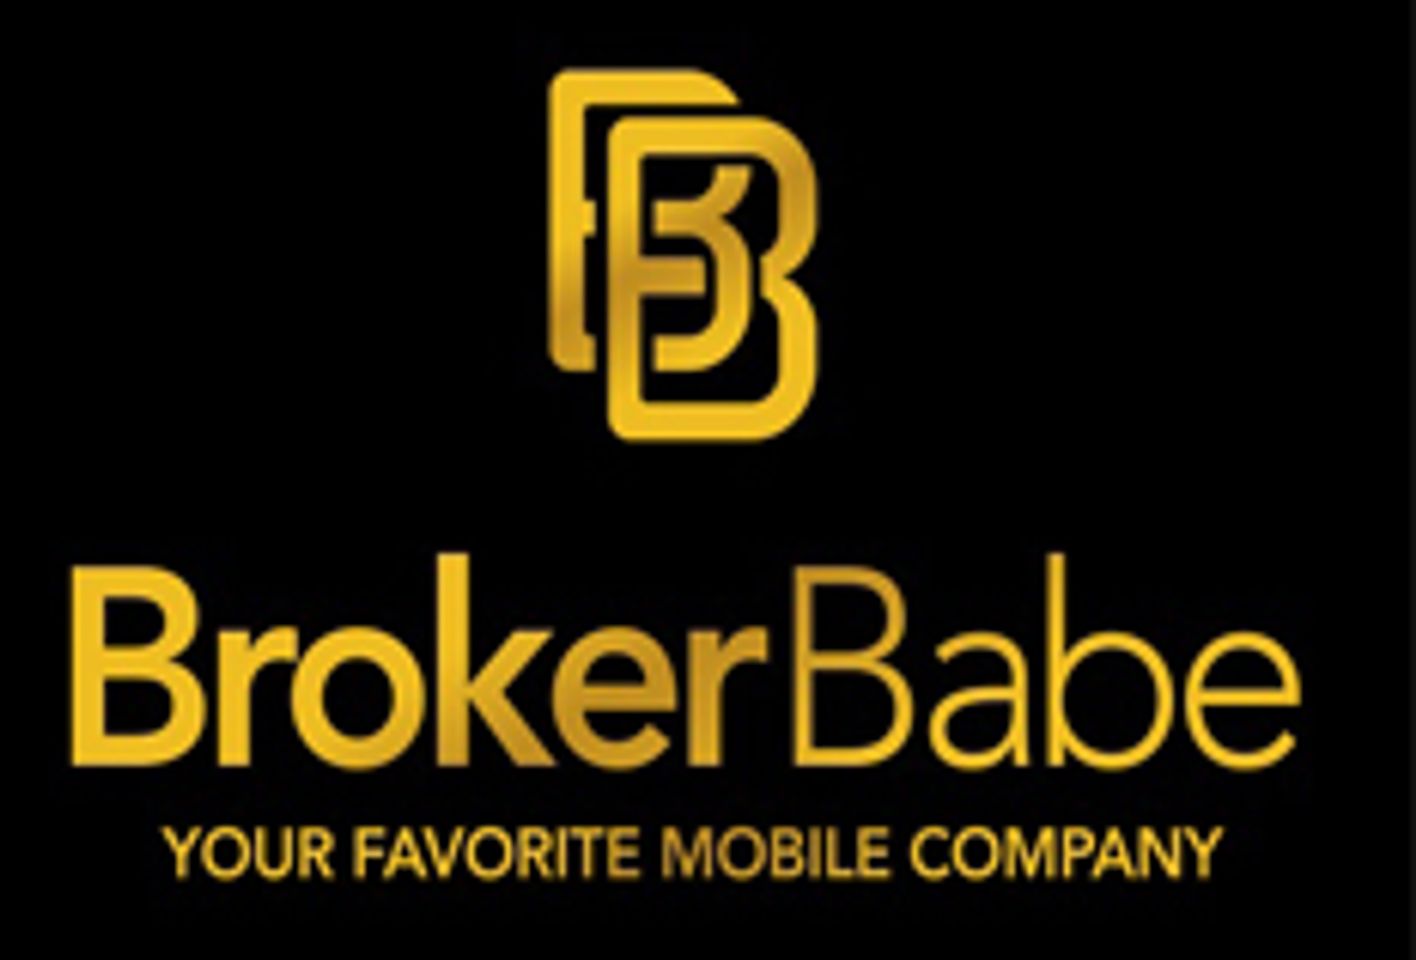 Brokerbabe Announces New Promotion For Italy